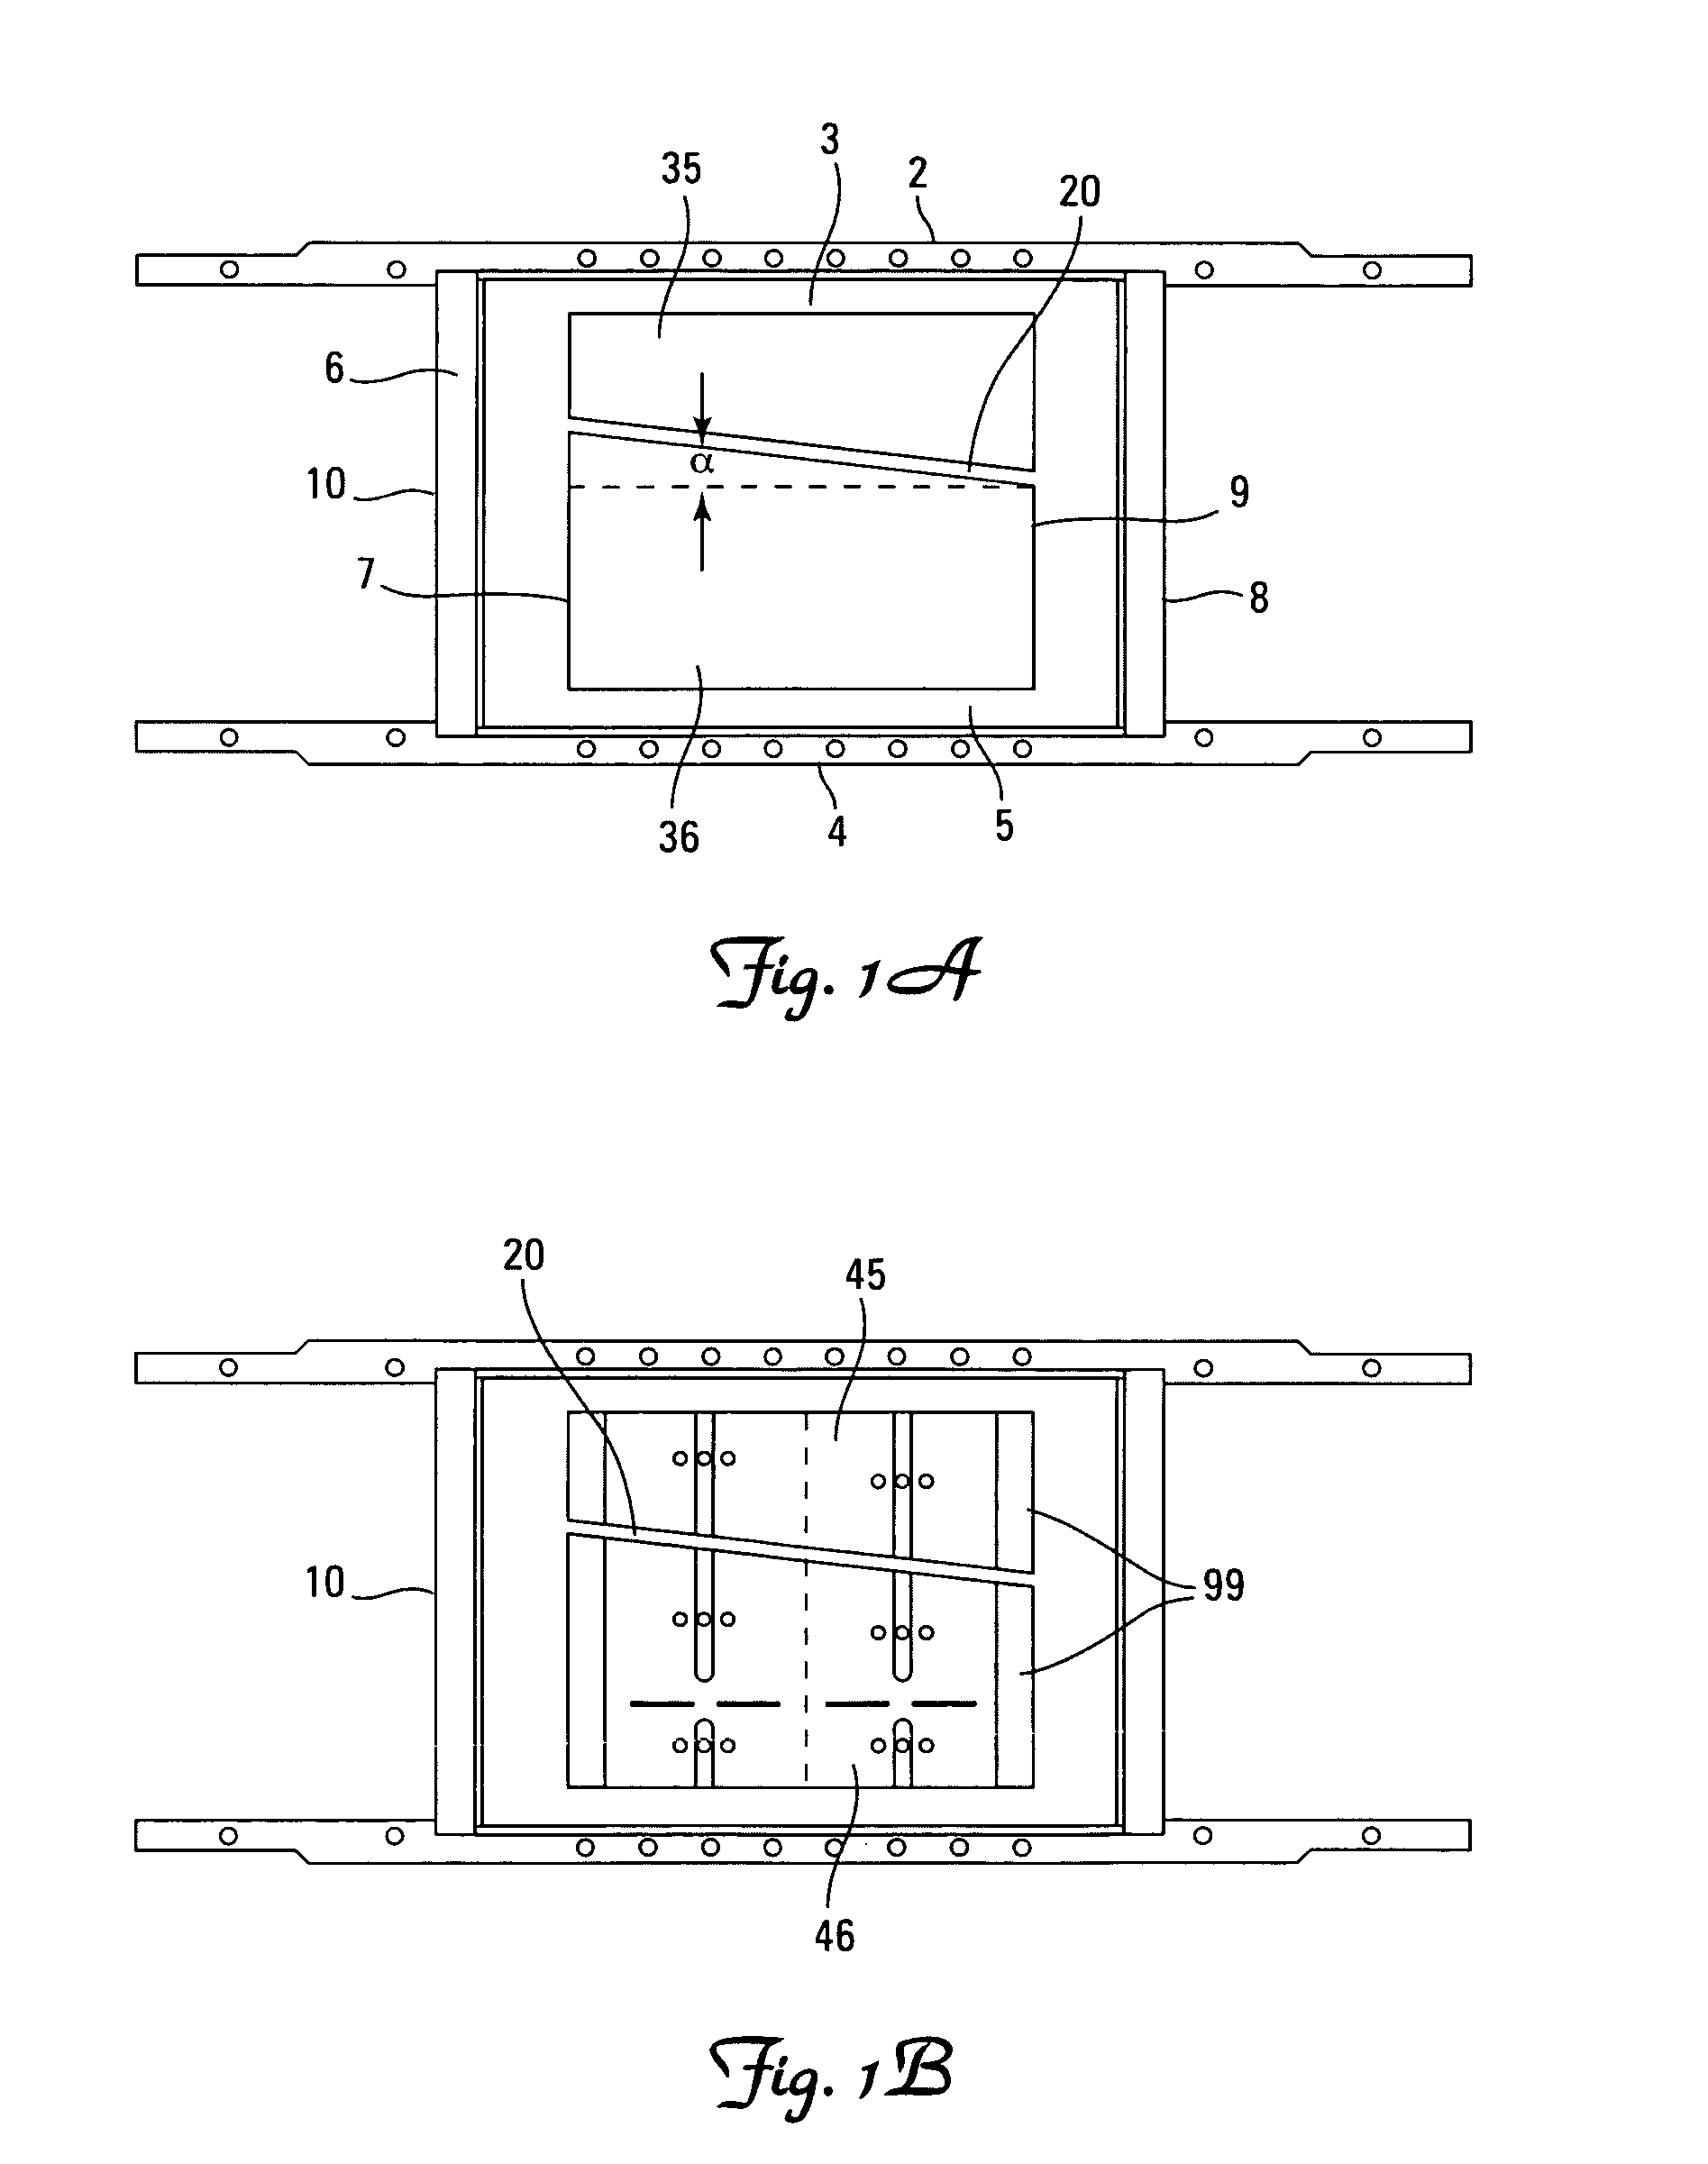 Mold box and method of manufacturing multiple blocks